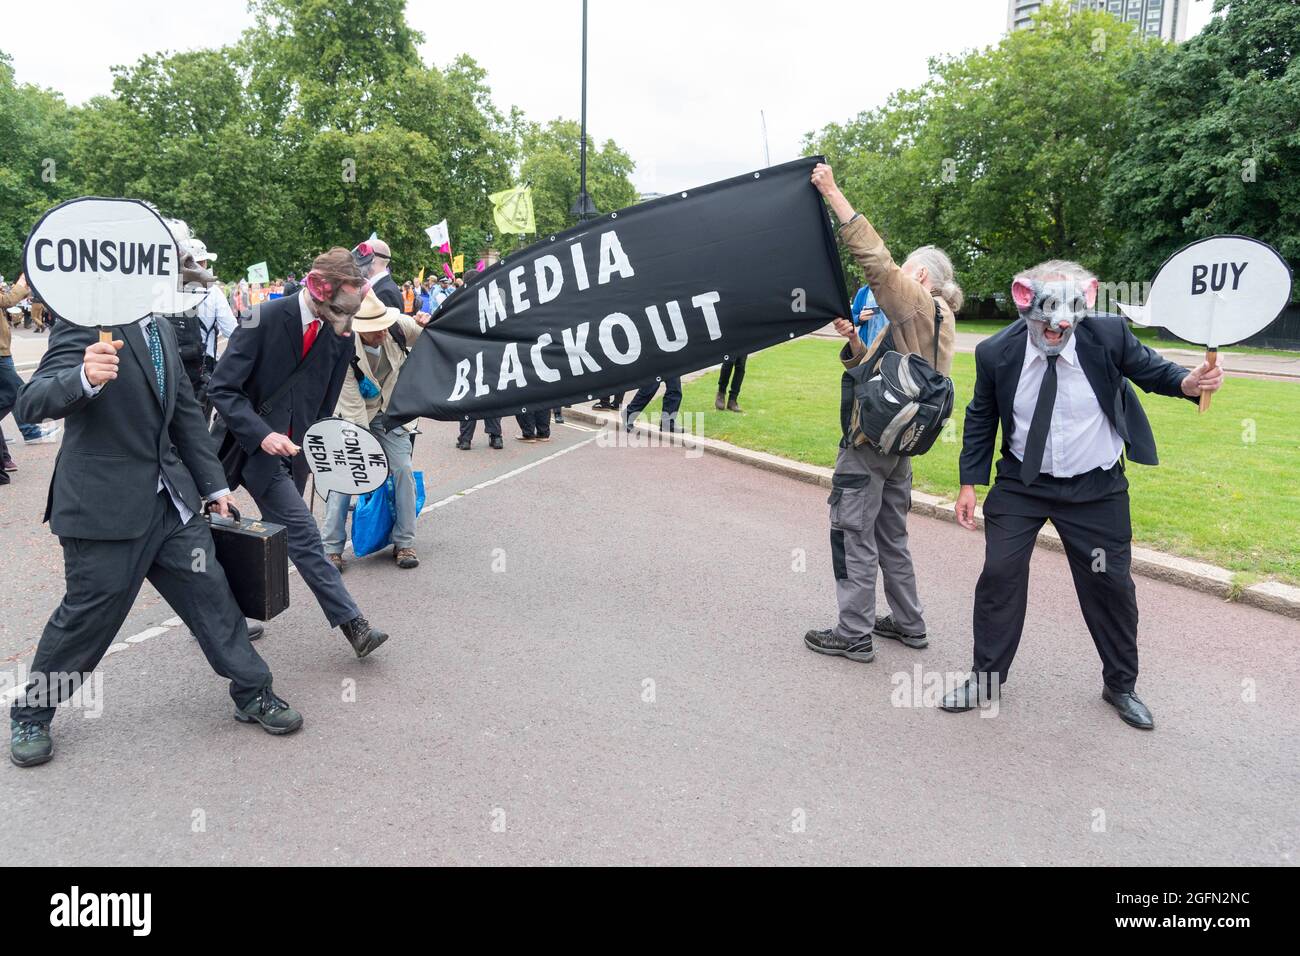 Protesters seen wearing costumes and holding a banner reading 'Media blackout' during the protest.Extinction Rebellion's Impossible Rebellion protest continues as protesters march from Hyde Park in London under the theme 'Stop The Harm' against climate change, global warming, and plans to target the root cause of the climate and ecological crisis and to demand the government divest from fossil fuel companies. (Photo by Dave Rushen / SOPA Images/Sipa USA) Stock Photo